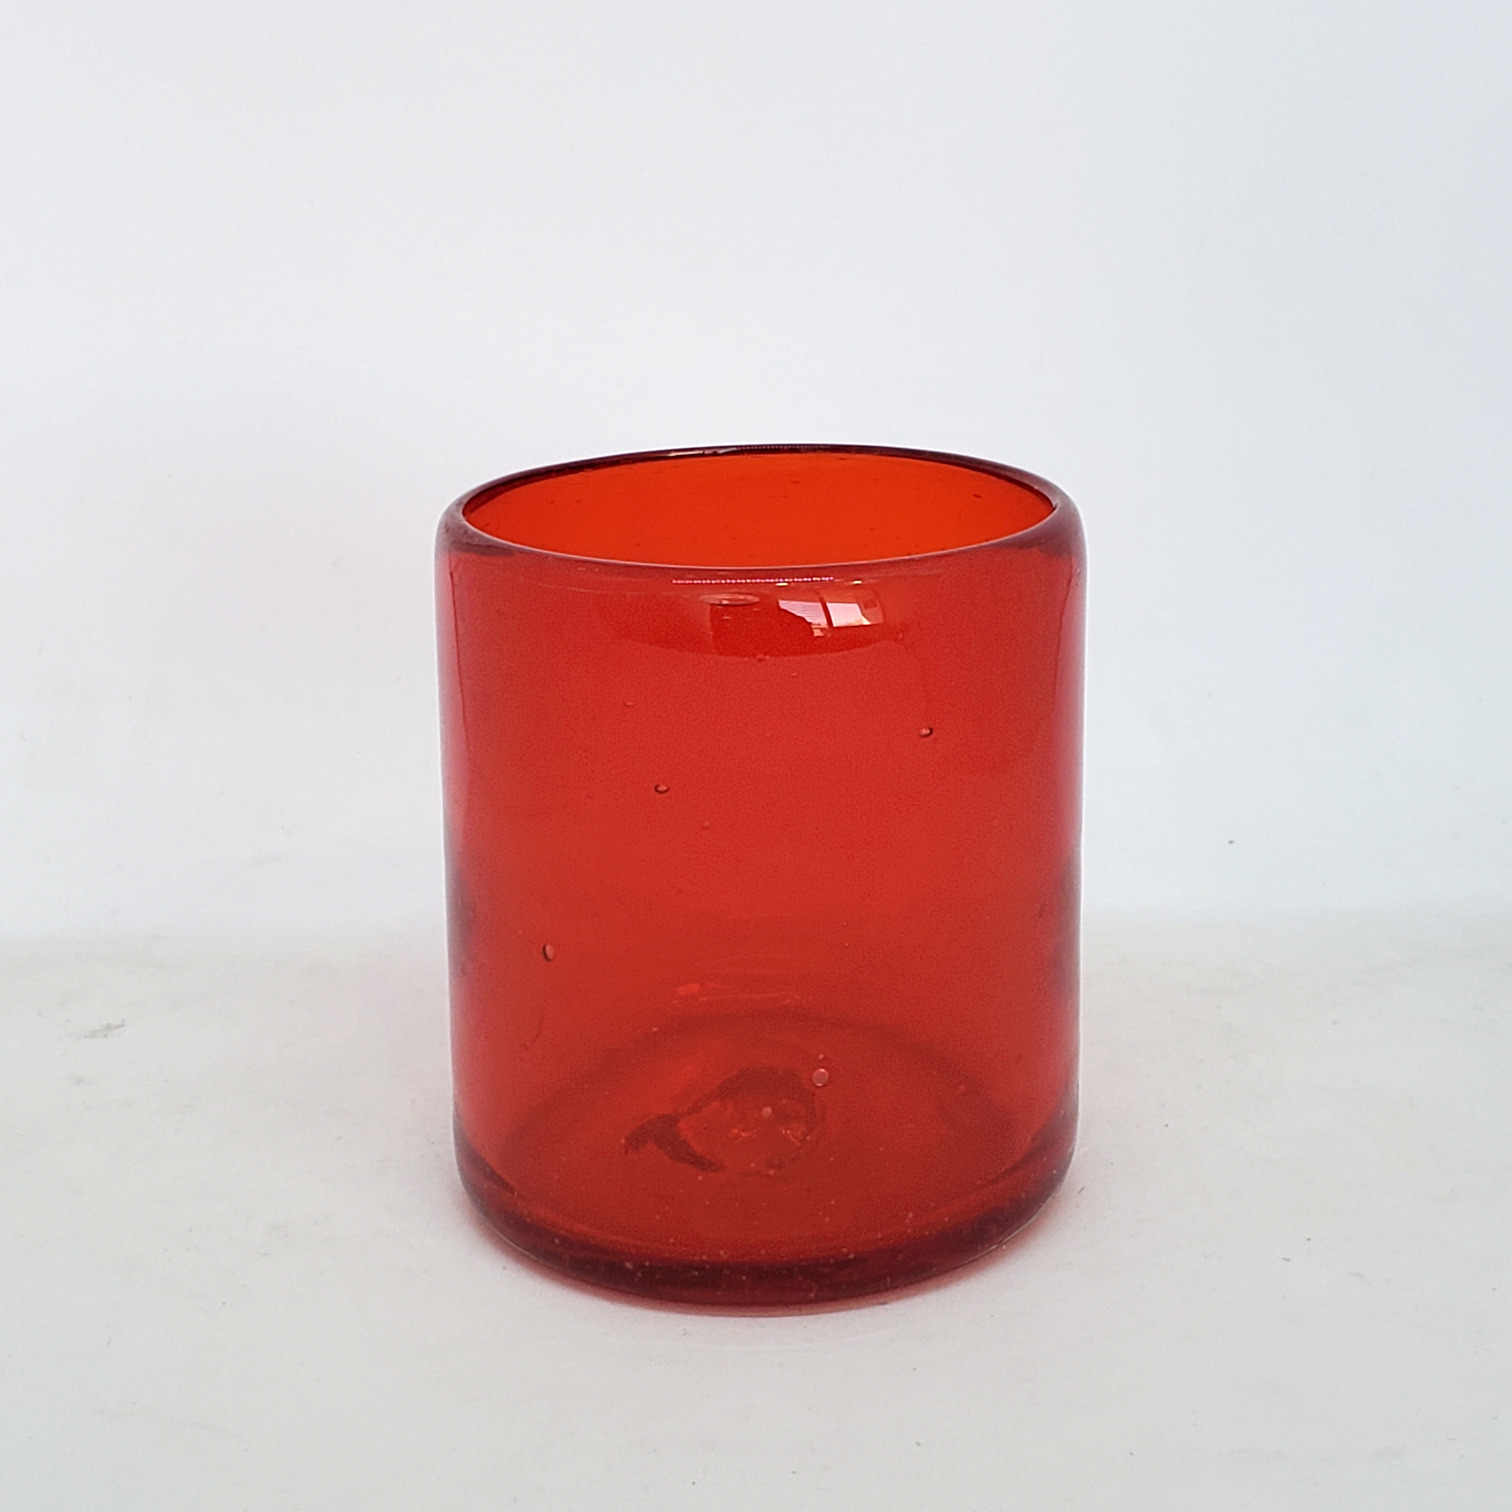 Wholesale Colored Glassware / Solid Ruby Red 9 oz Short Tumblers  / Enhance your favorite drink with these colorful handcrafted glasses.